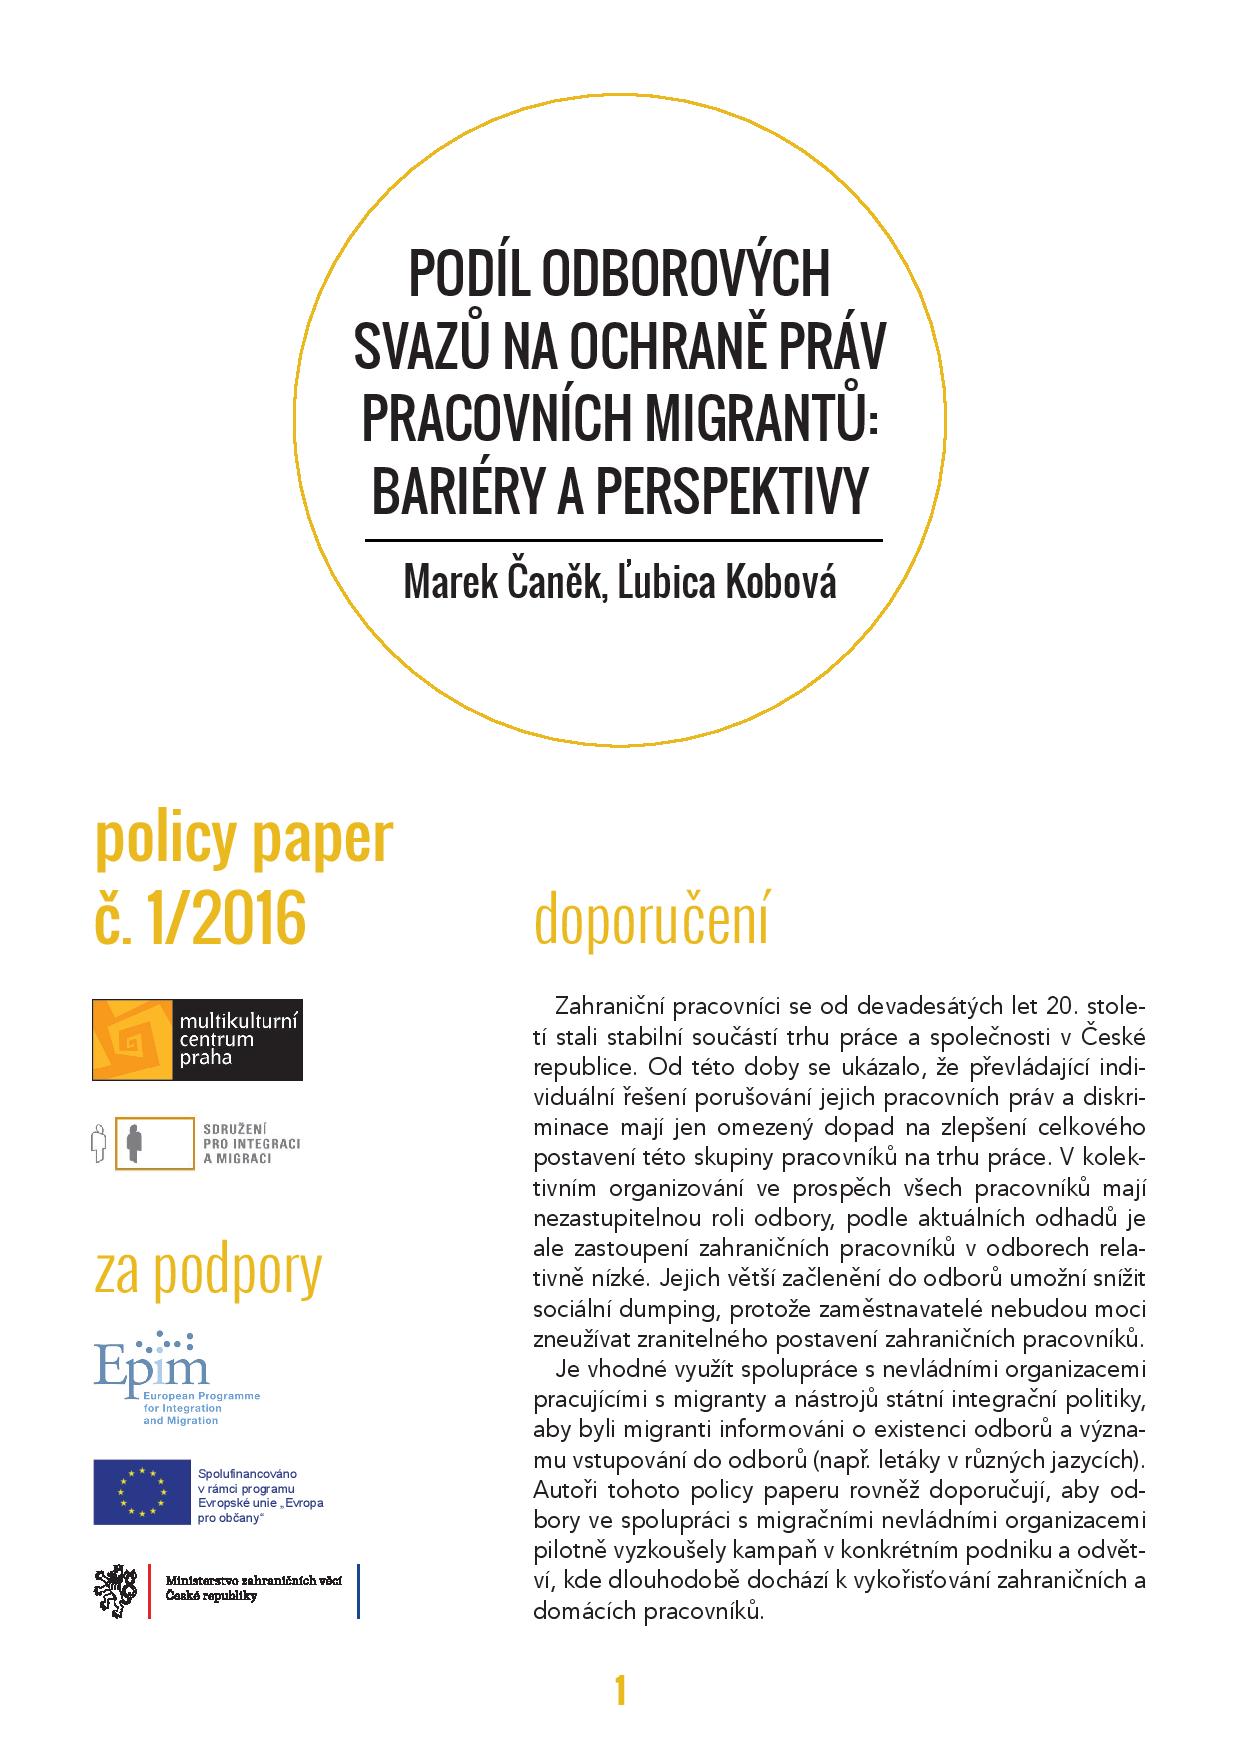 odbory_policy_paper_c.1-page-001.jpg